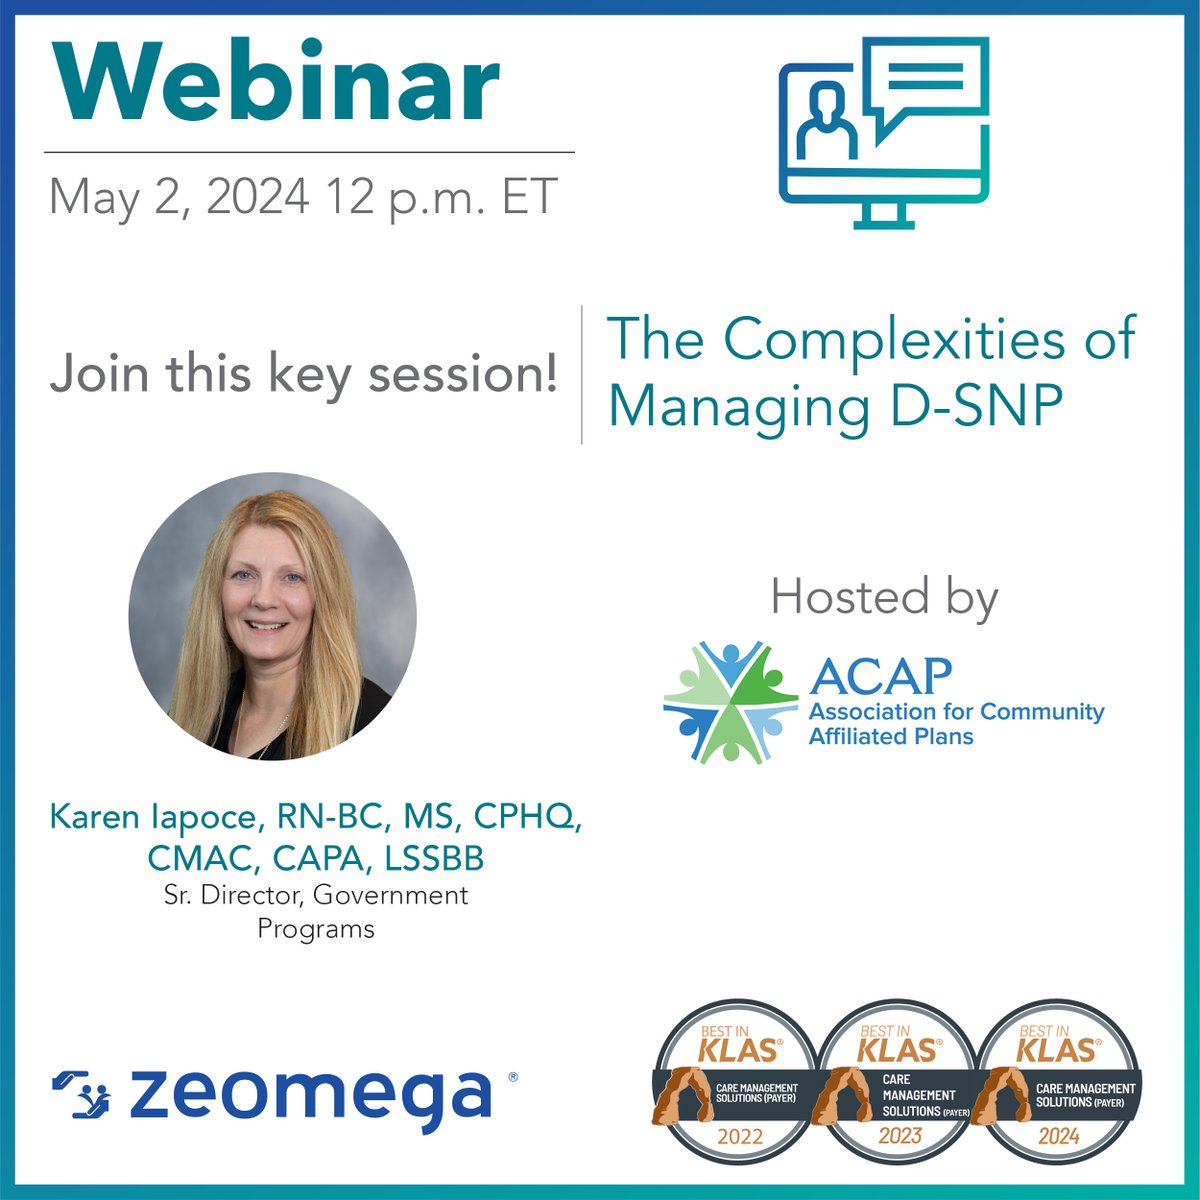 Have you registered for our webinar on May 2? Senior Director of Government Programs, Karen Iapoce, will walk us through how #Jiva is designed to manage Dual Eligible Special Needs Plans (D-SNPs). Sign up on our website! 🔎 🔎 zeomega.com/webinars/the-c…